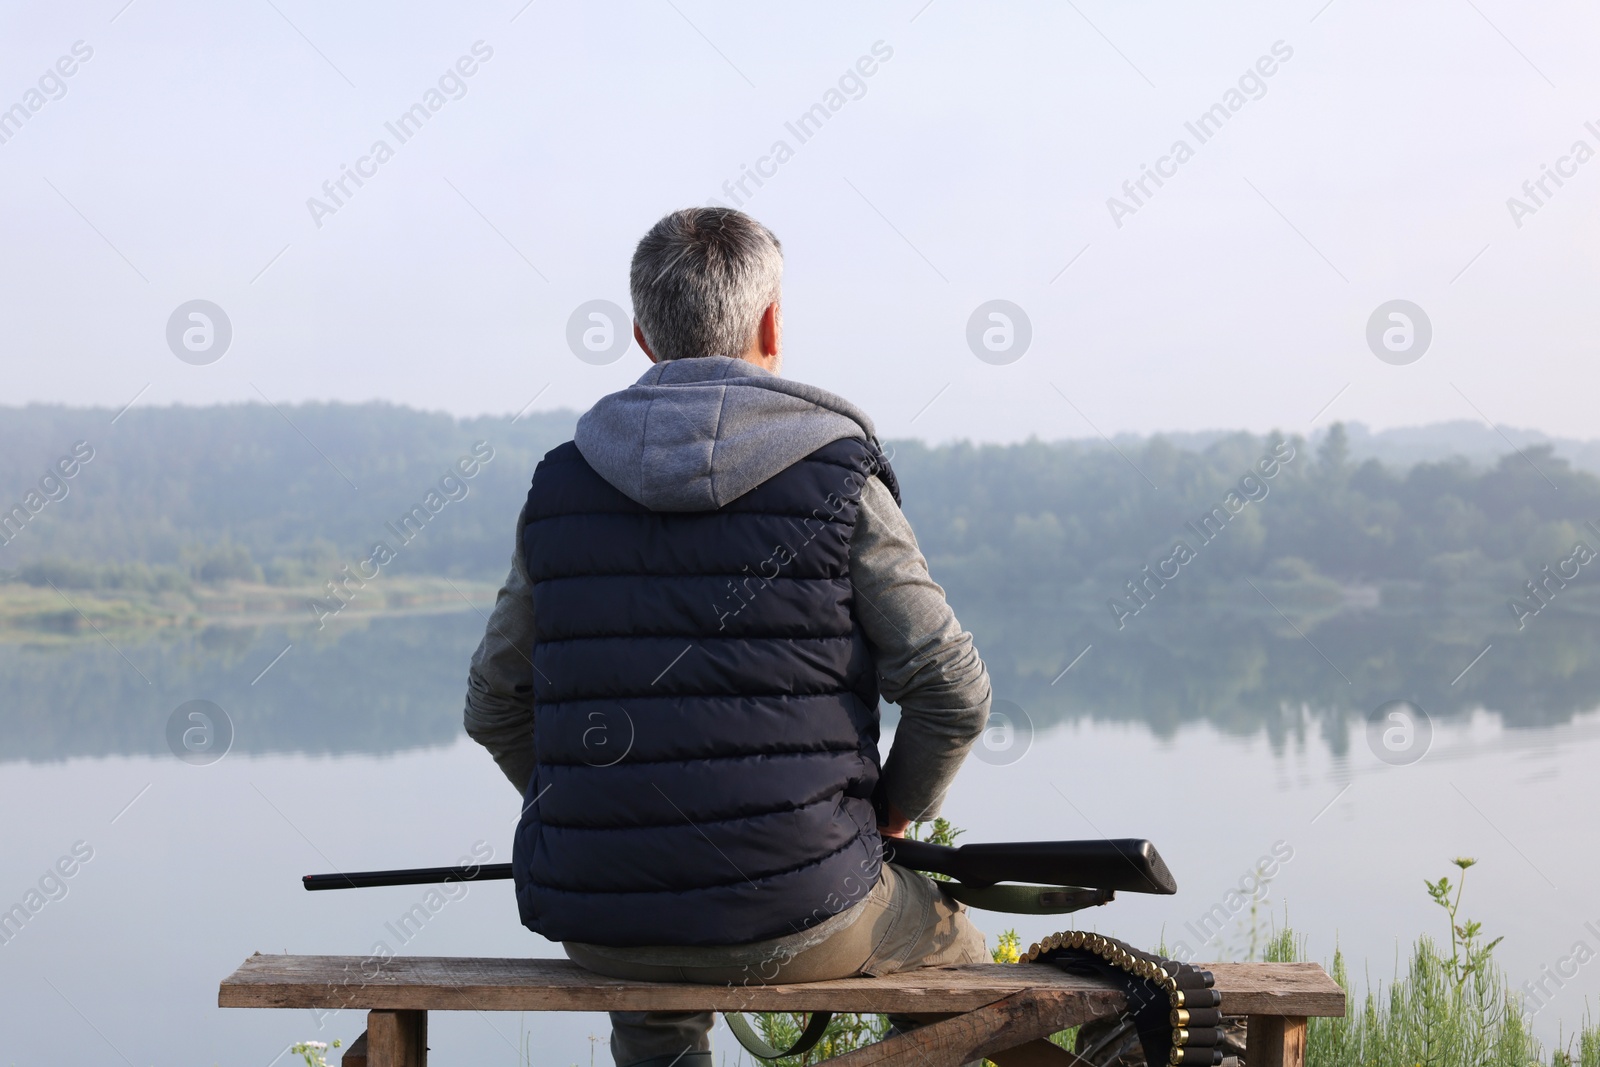 Photo of Man with hunting rifle sitting on wooden bench near lake outdoors, back view